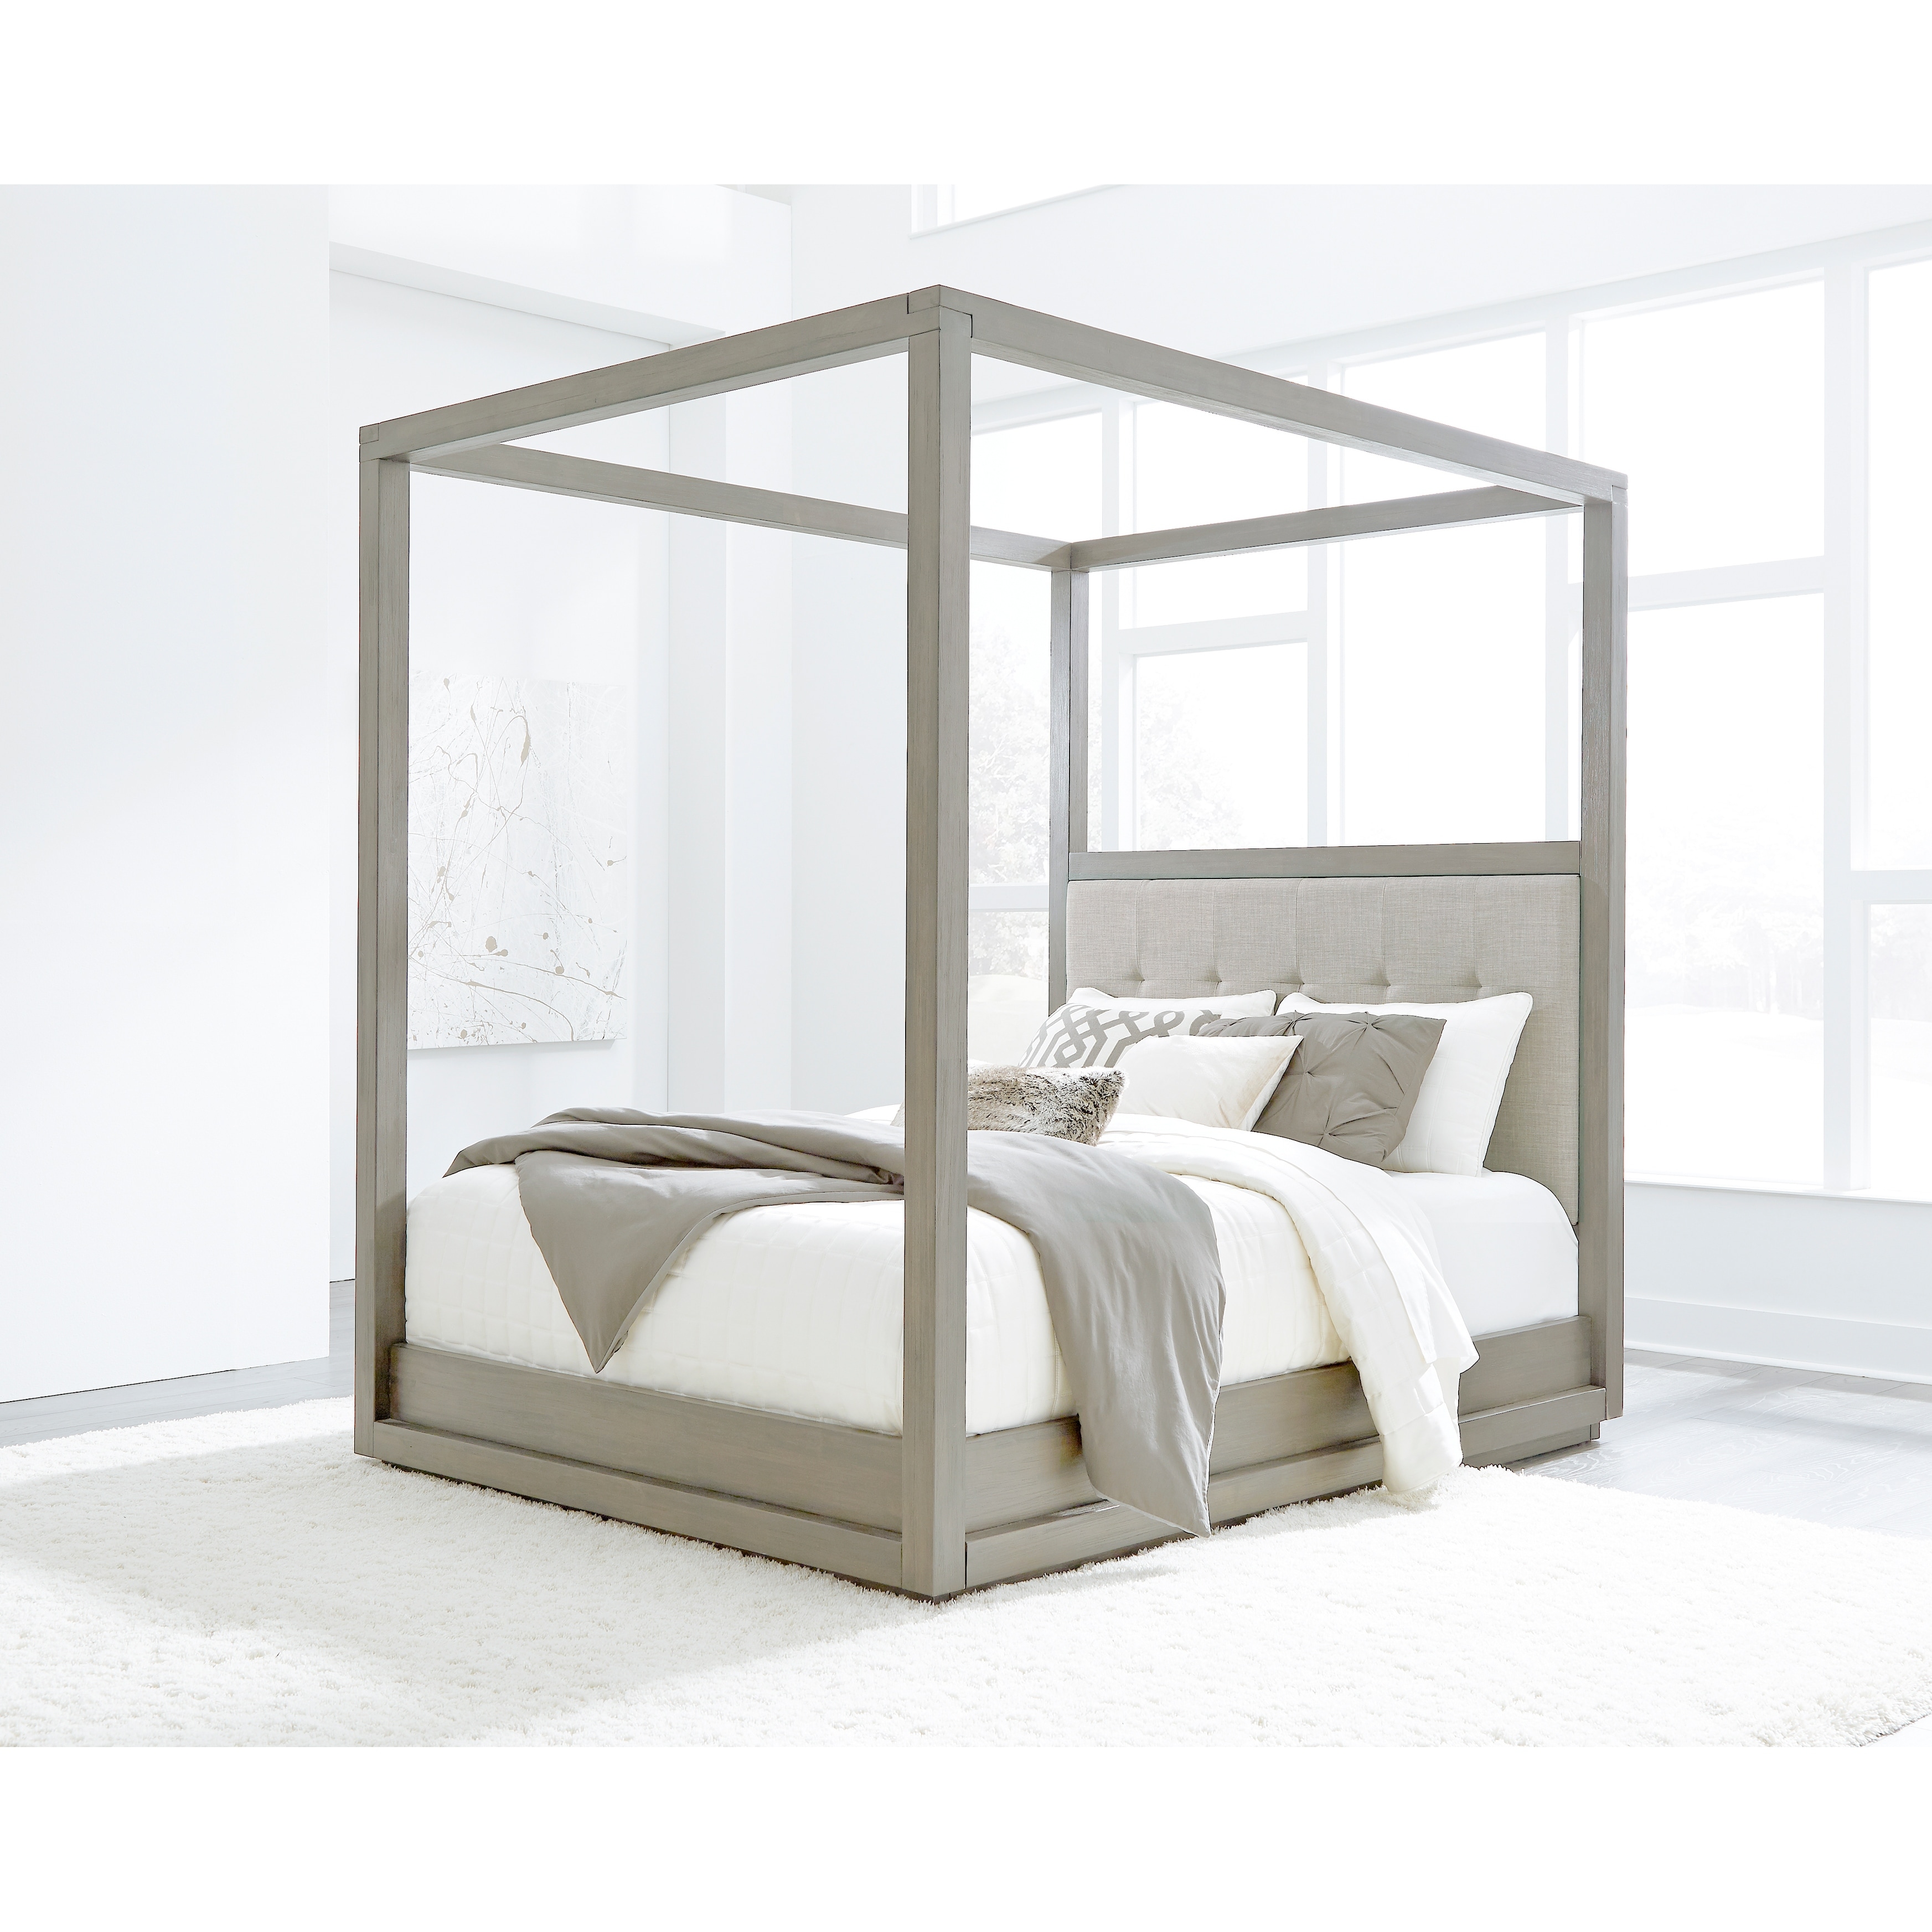 https://ak1.ostkcdn.com/images/products/is/images/direct/4a6c853a50917a31725c5e6379f98b0c51fa90fe/Oxford-Canopy-Bed-in-Mineral.jpg